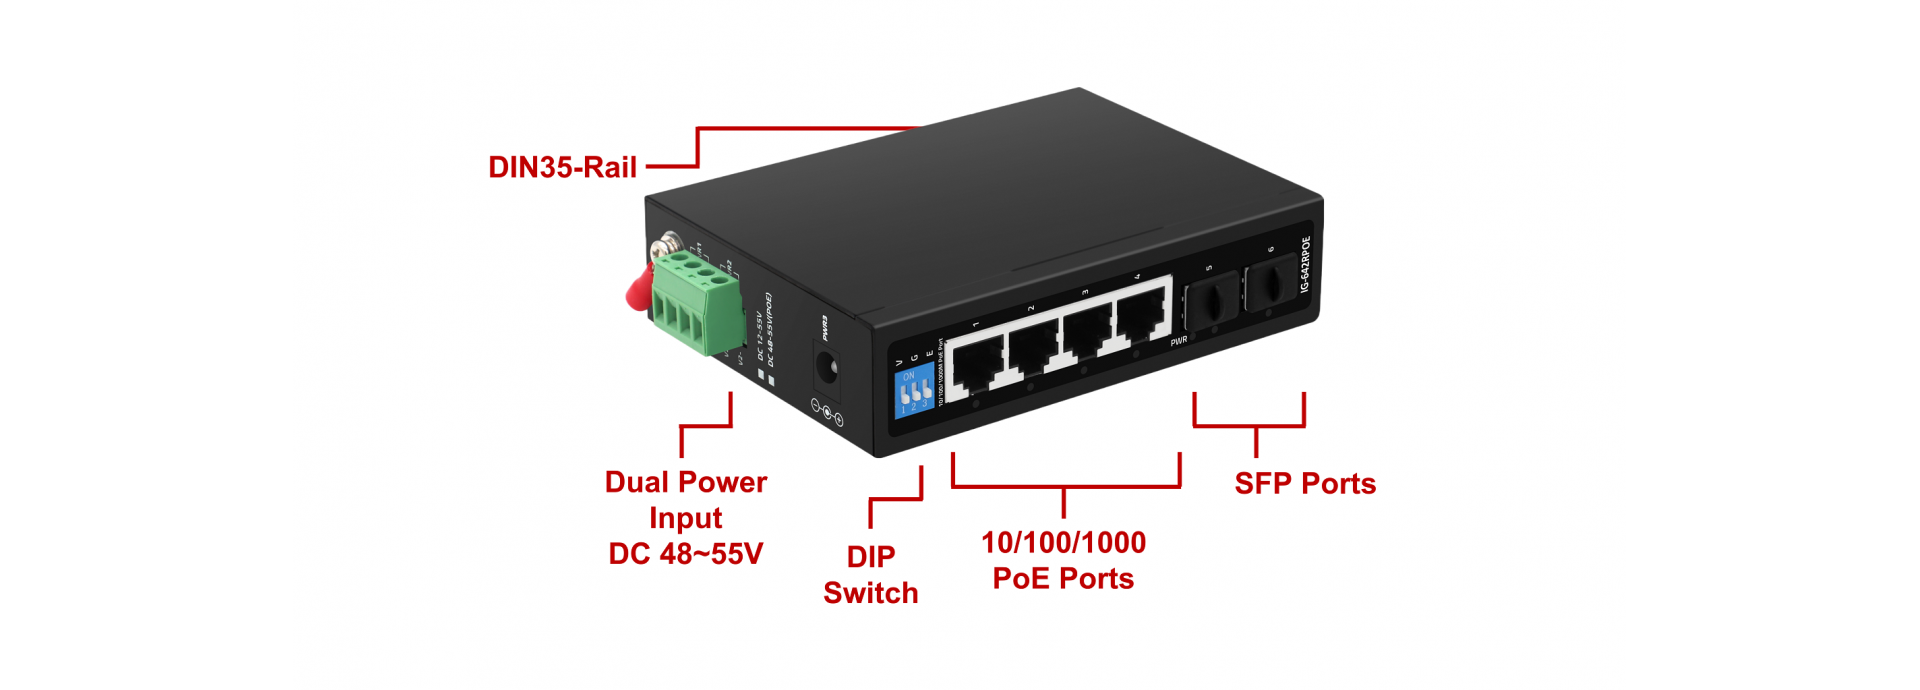 Reliable Industrial-grade Unmanaged POE Switch for extreme environment